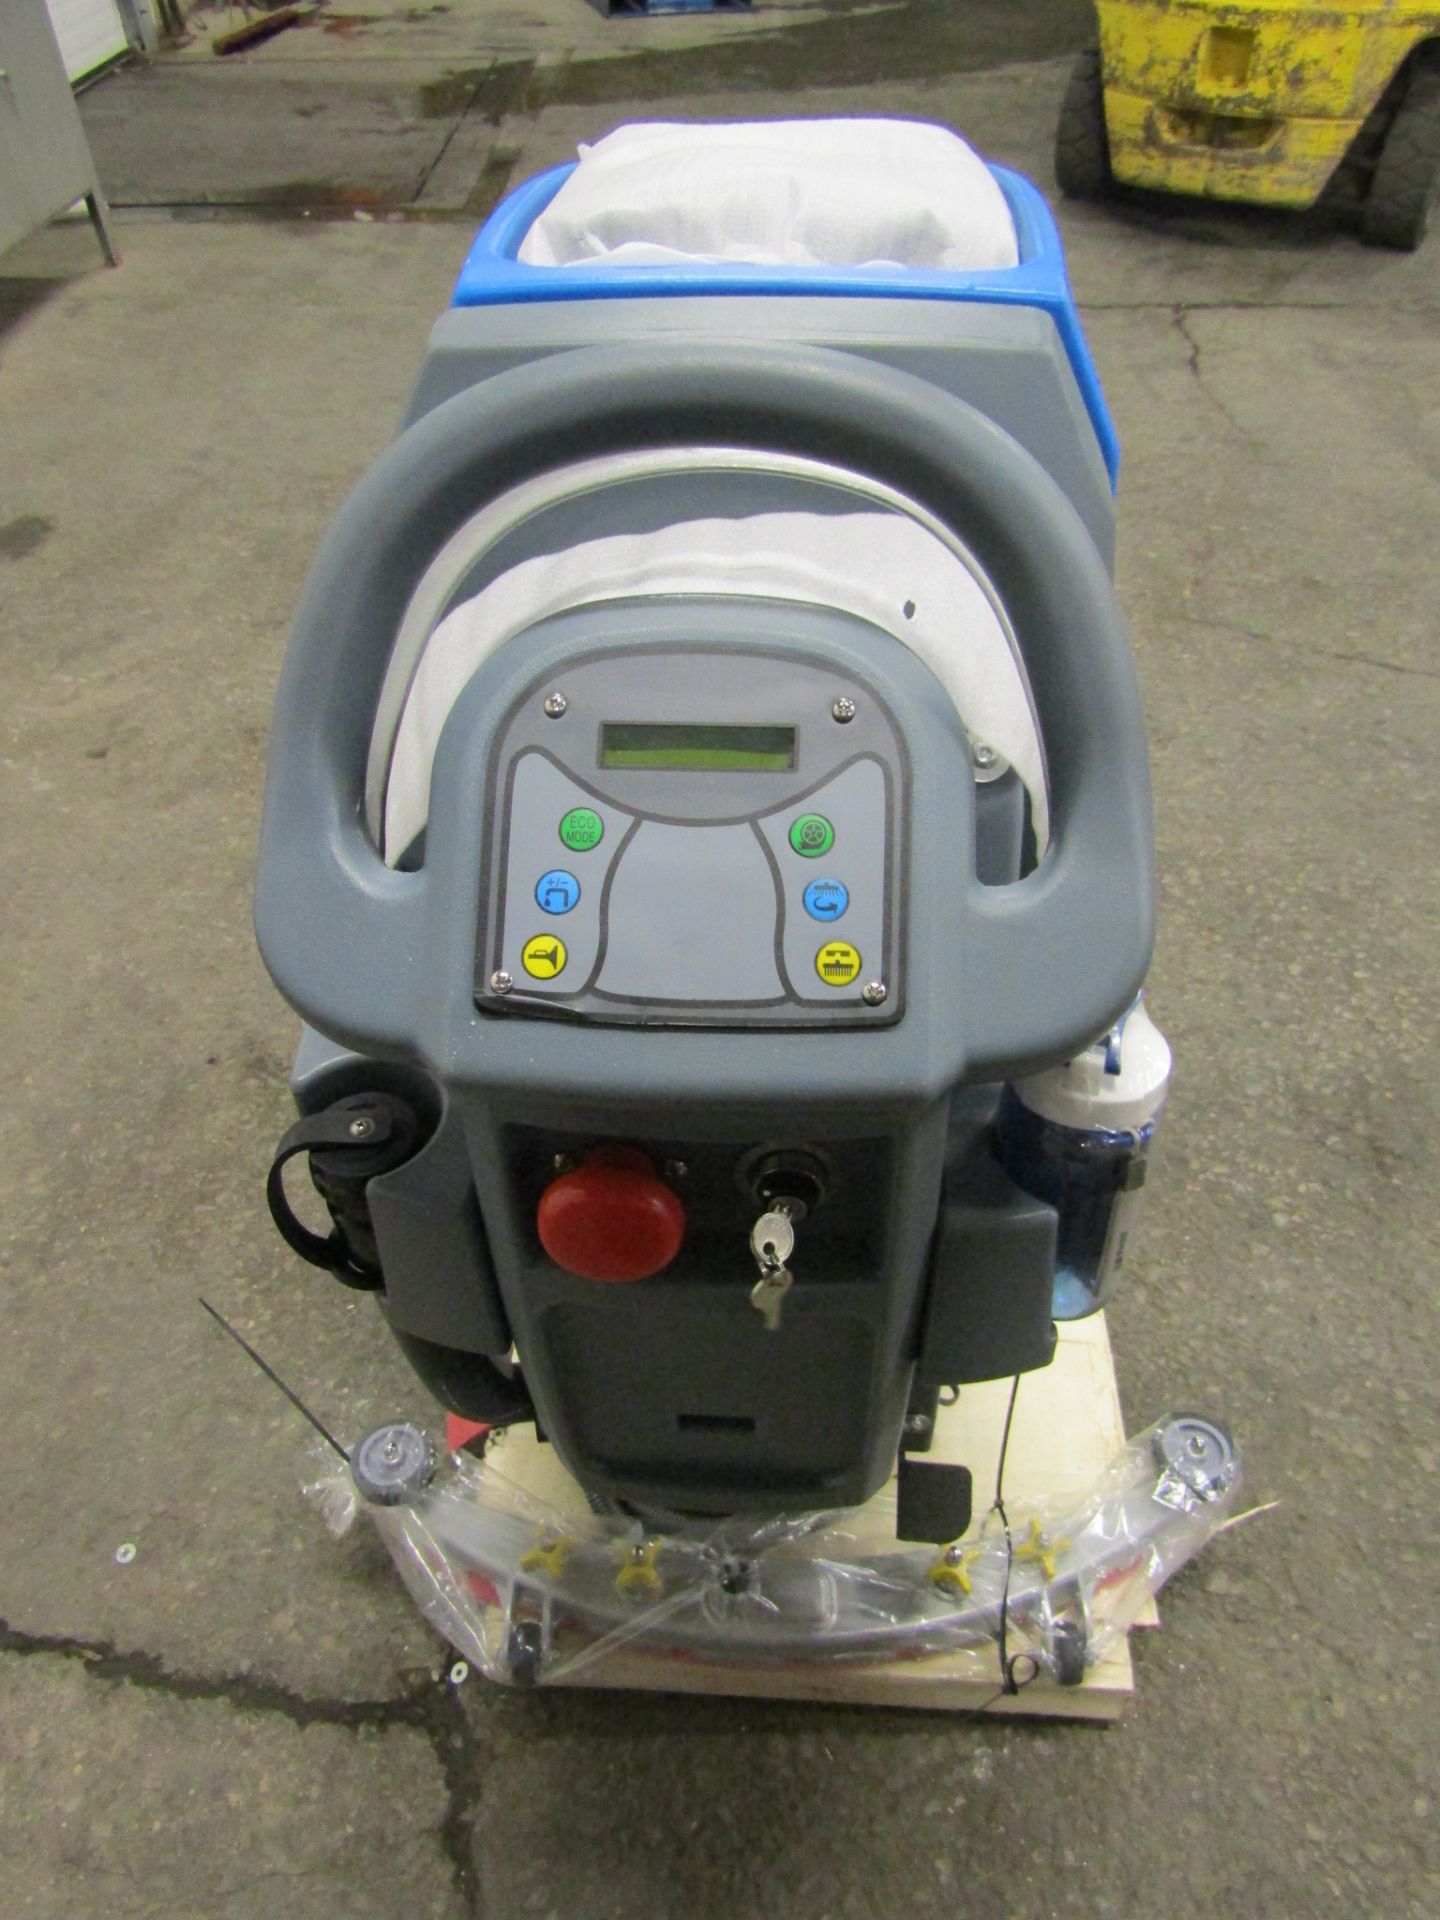 Extreme MINT Walk Behind Floor Sweeper Scrubber Unit model X2 - BRAND NEW with extra pads, digital - Image 2 of 3